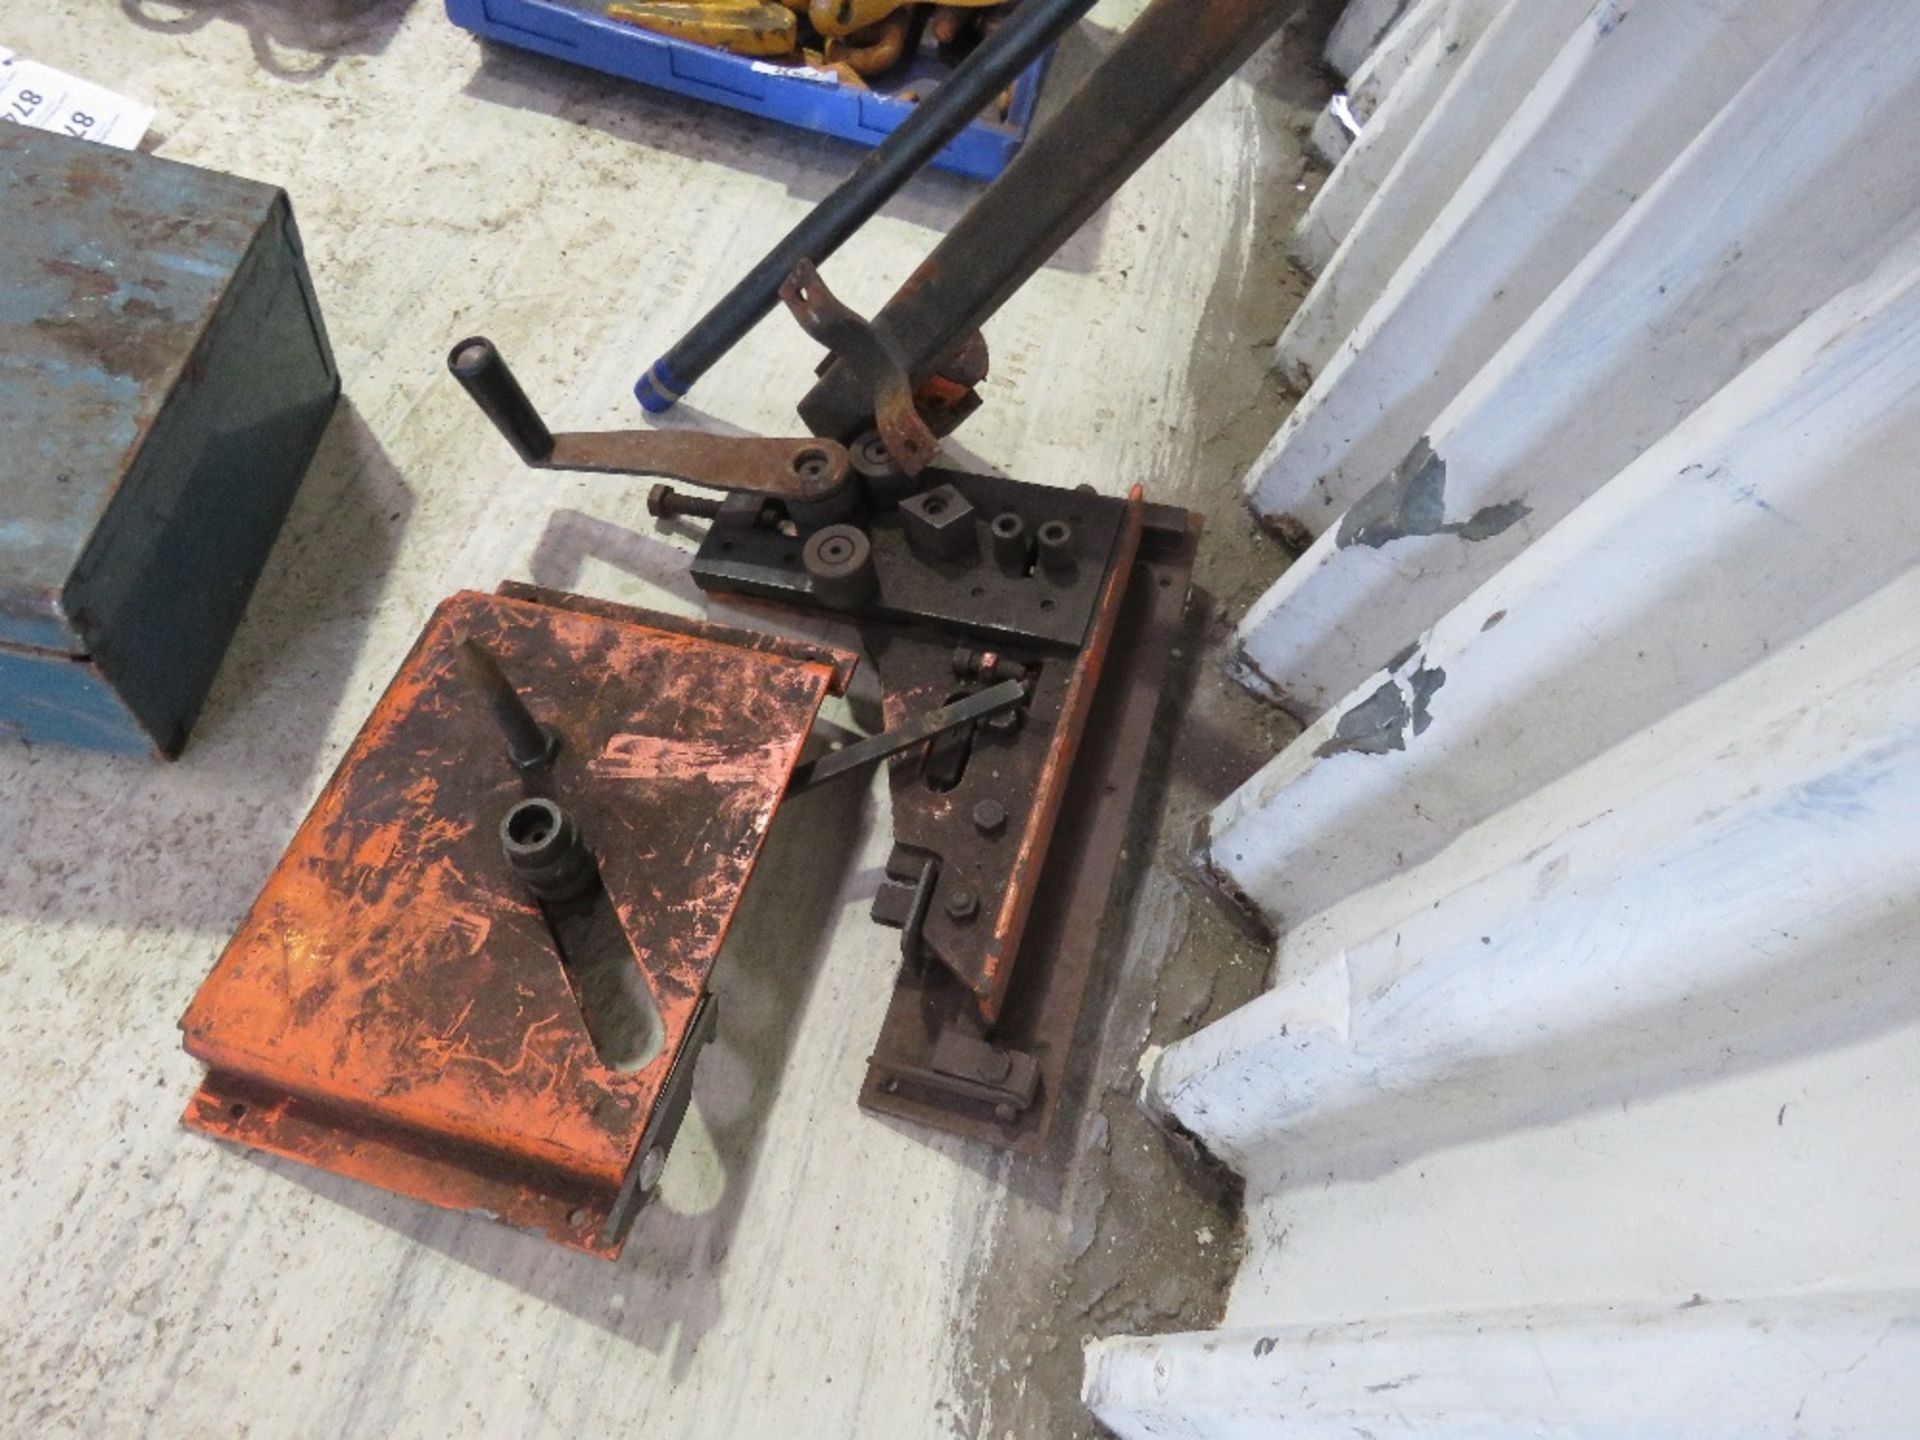 ASSORTED DECORATIVE IRON WORK / WROUGHT IRON WORK BENDERS AND JIGS. - Image 3 of 10